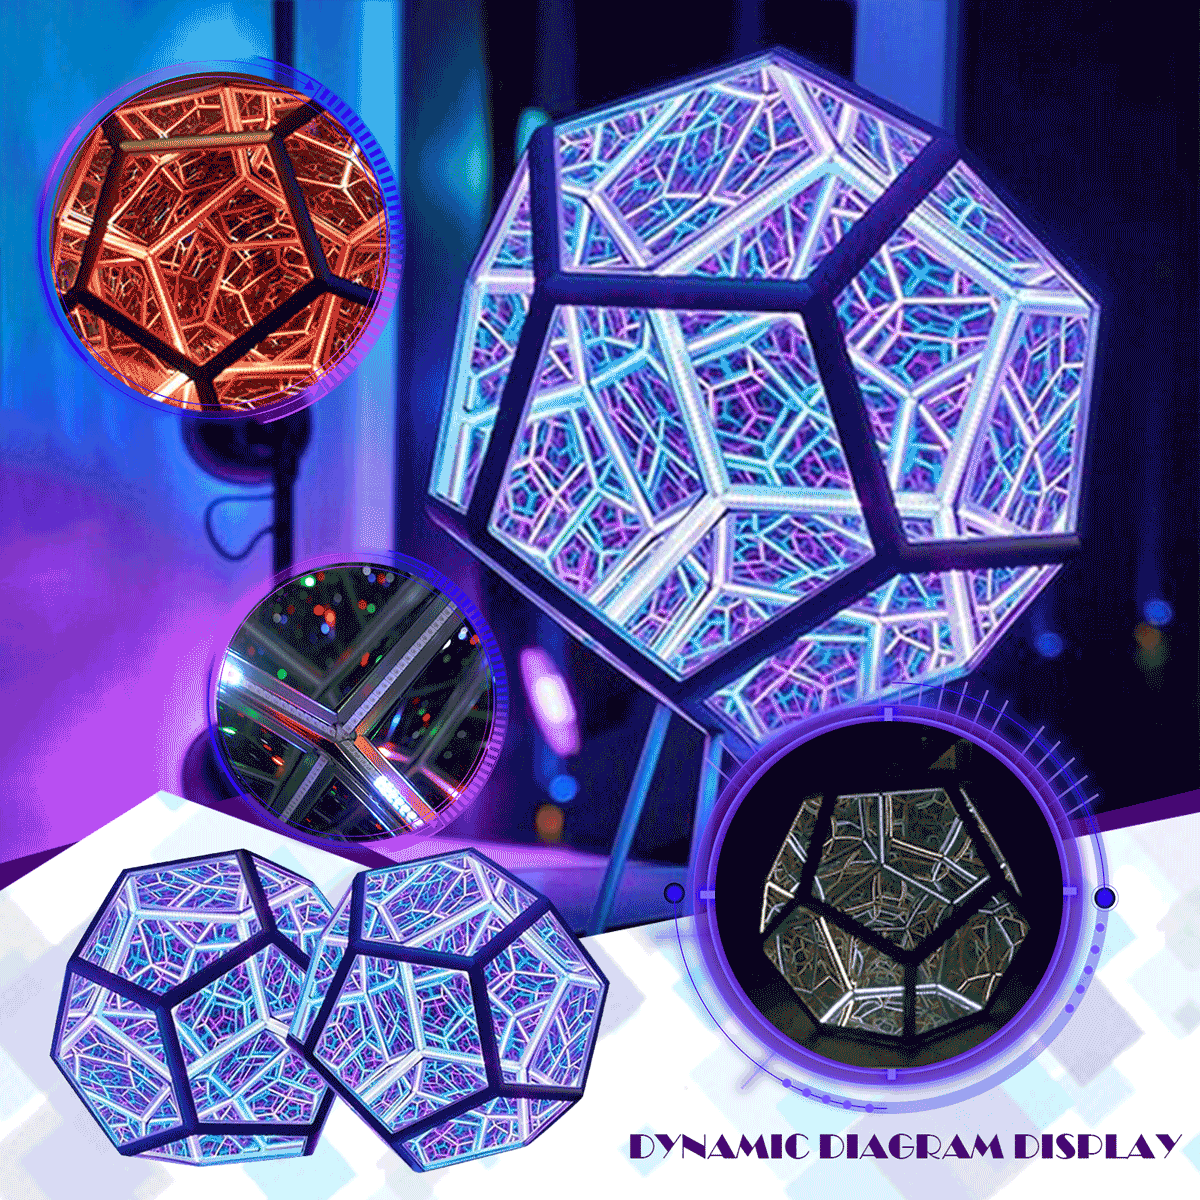 LED-Night-Light-Infinite-Dodecahedron-Color-Art-Light-Decor-Novelty-Christmas-Gift-Cool-Technology-D-1892830-1